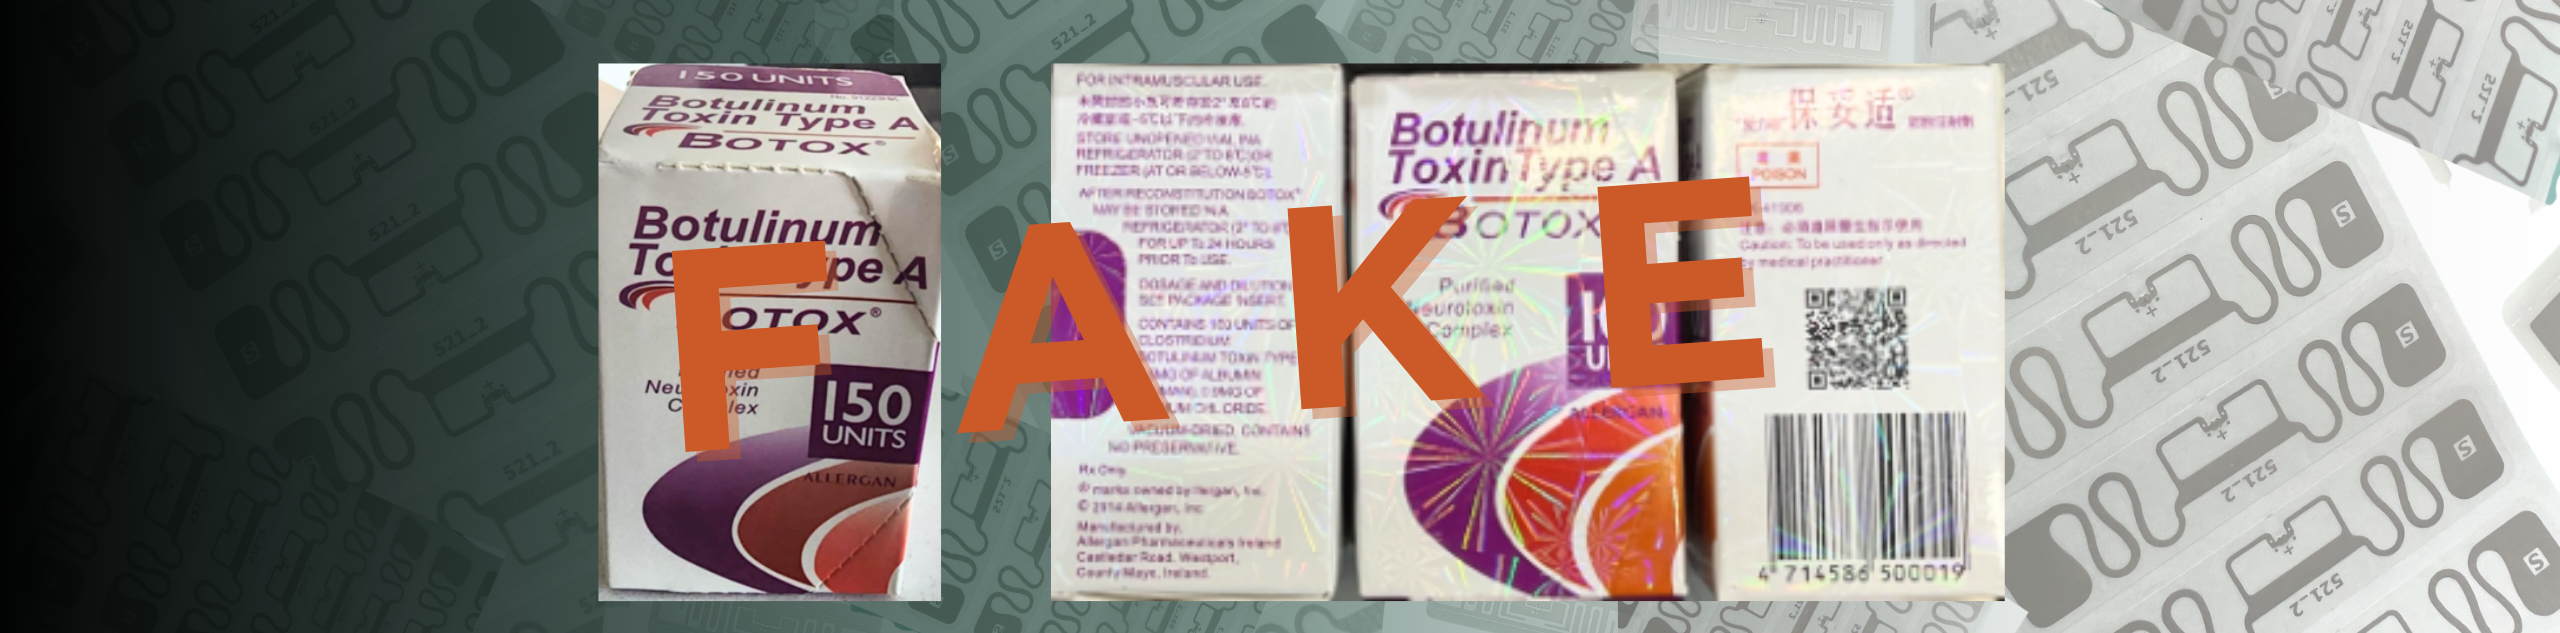 two pictures of fake Botox boxes. FAKE written in text overlay.